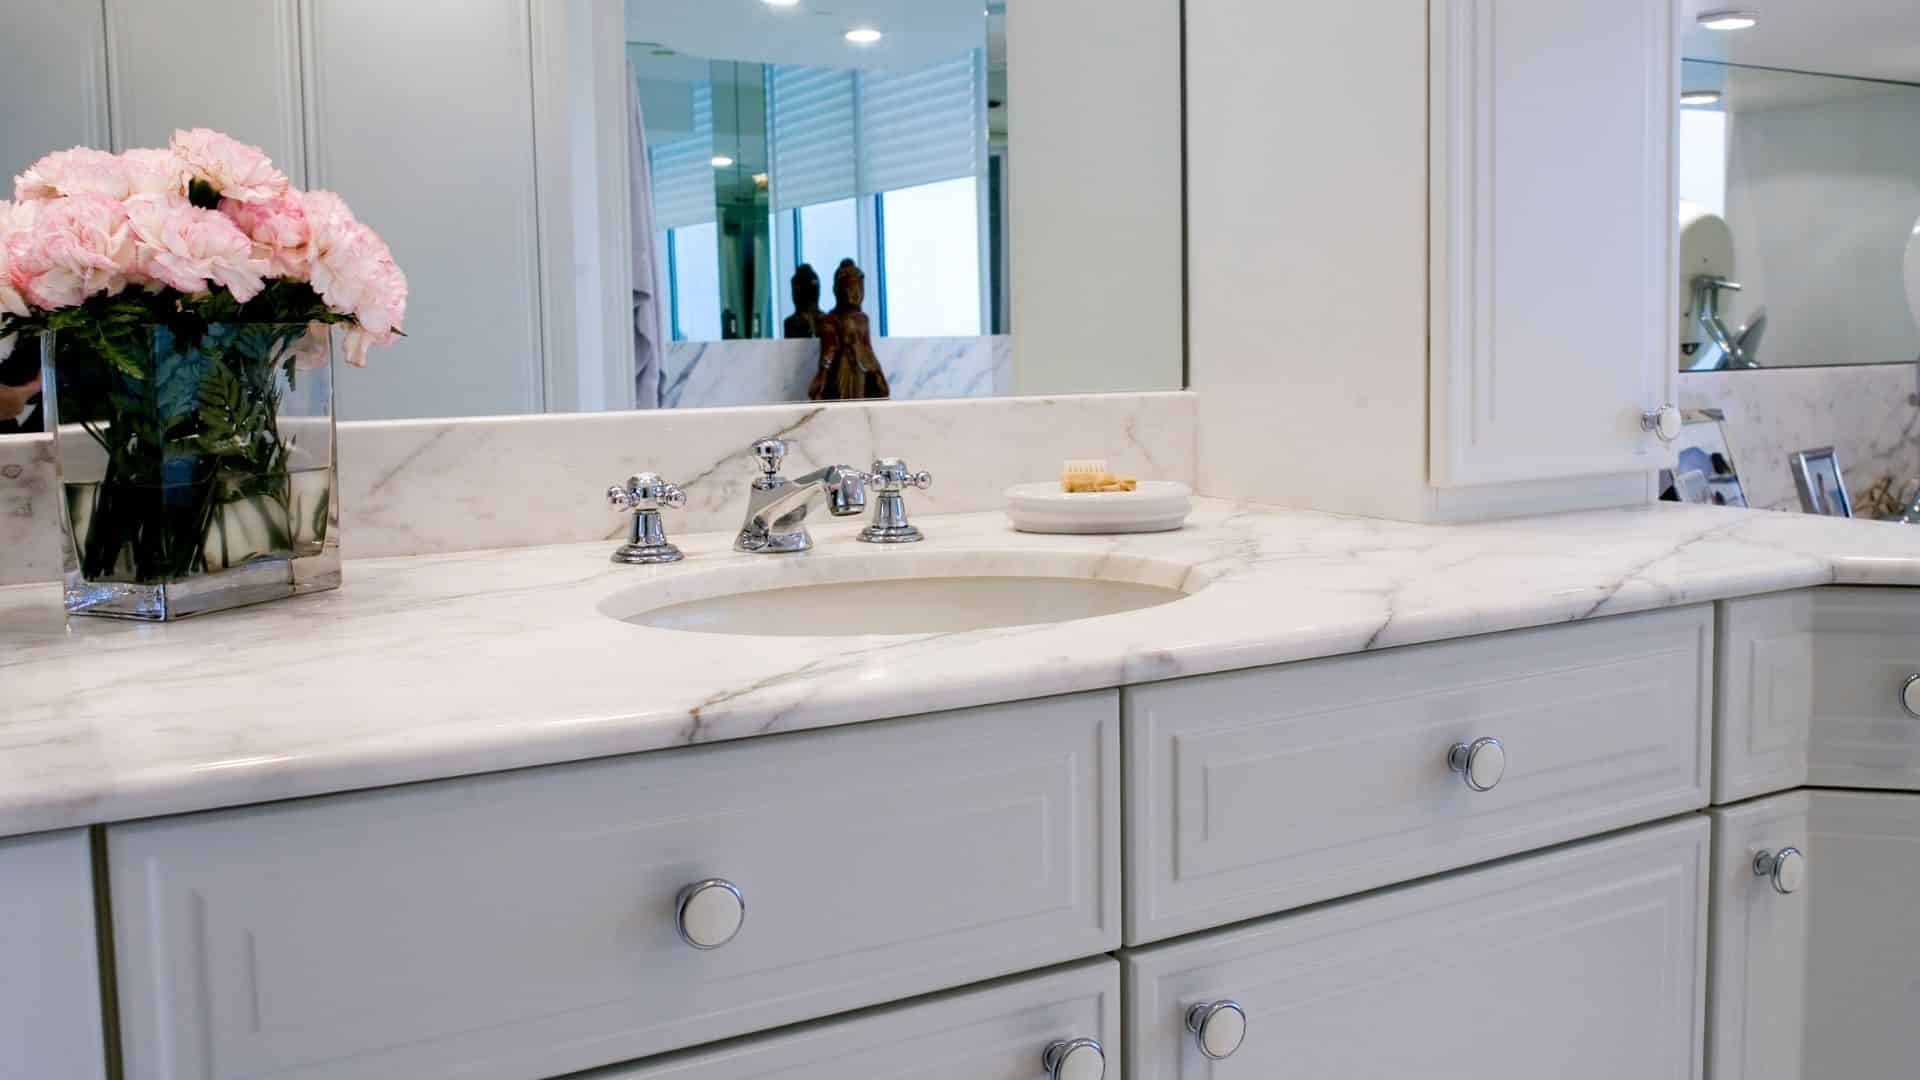 Elegant bathroom with marble countertop and gray cabinets